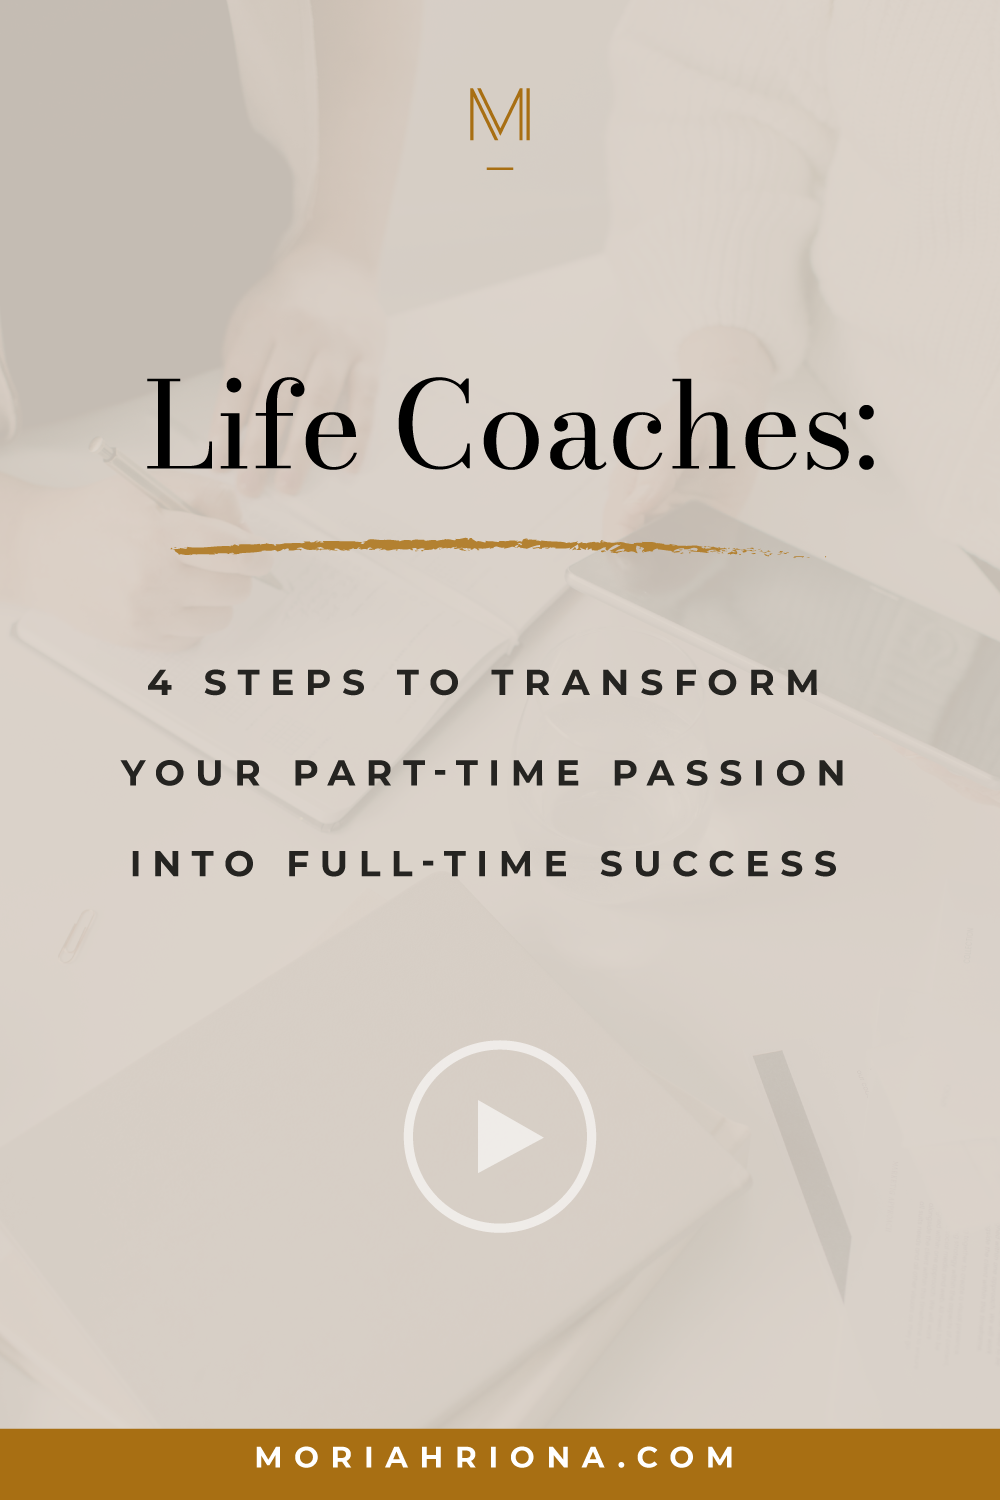 Wondering how to grow your business from a part-time passion to a full-time life coaching success? Then this blog post is for you! I’m sharing my top life coach tips for growing your online coaching business—so you can work smarter, not harder. #luxurybrand #lifecoach #lifecoaching #entrepreneurtips